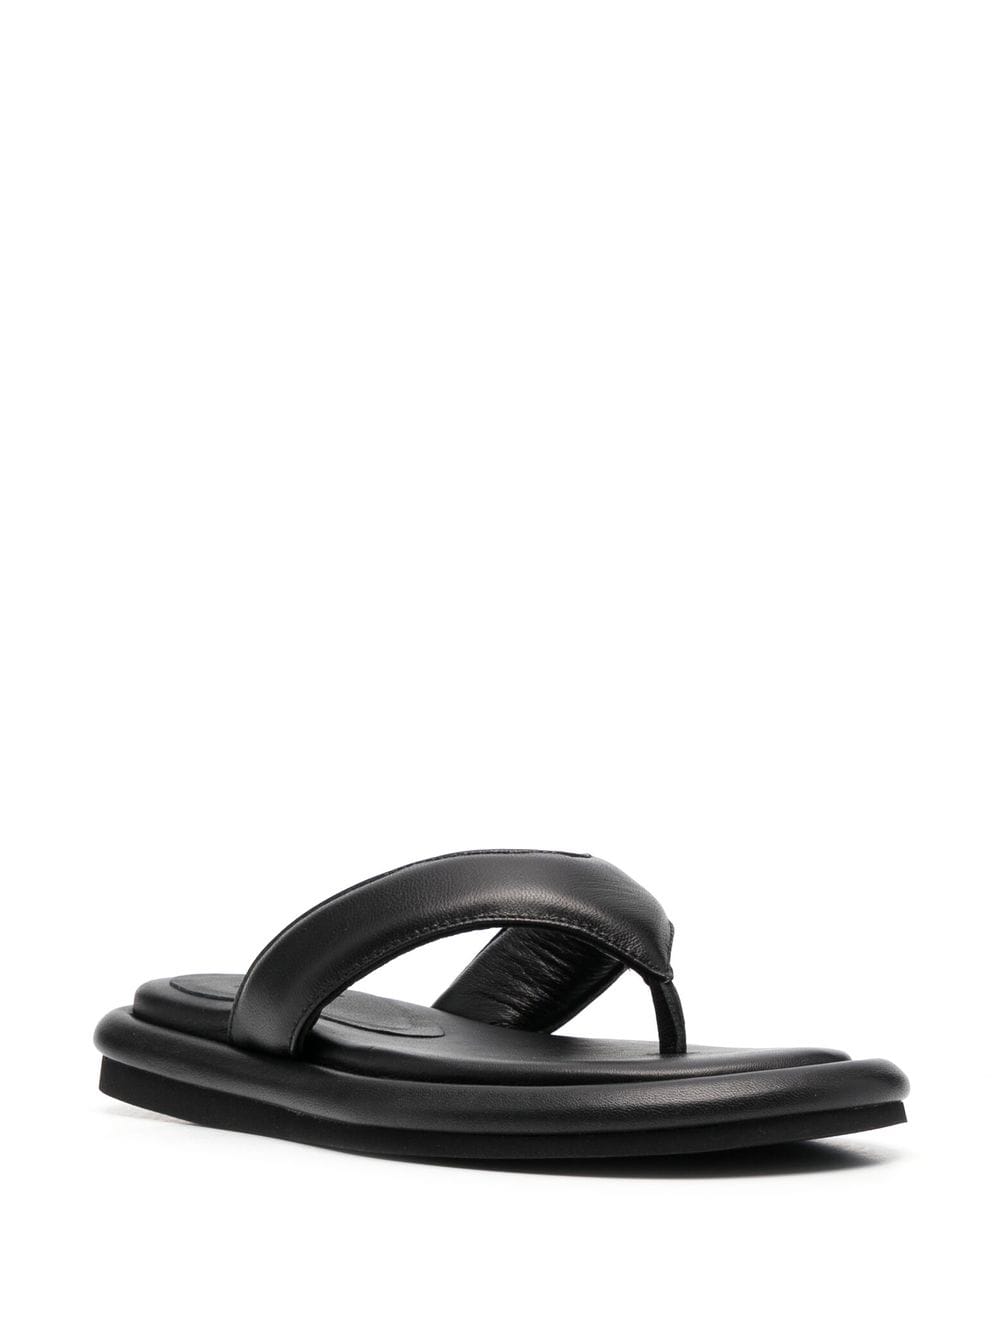 Gia 5 New Leather Thong Slipper